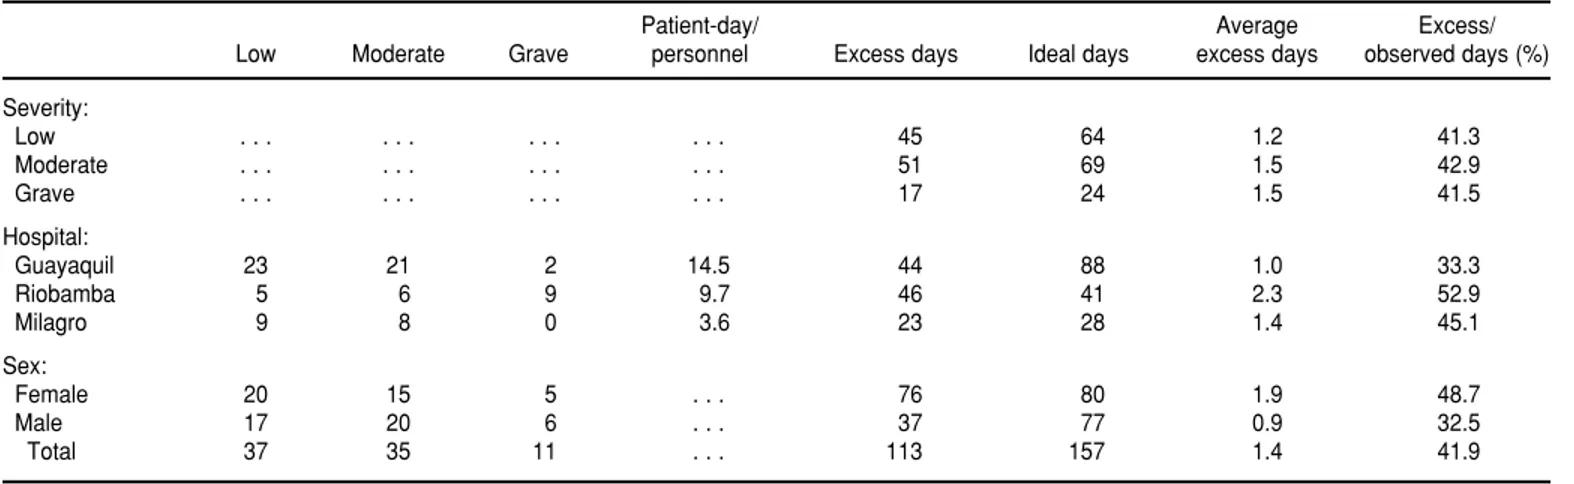 TABLE 3. Cholera-patient-days by severity, hospital, and sex, Ecuador, 1994 a